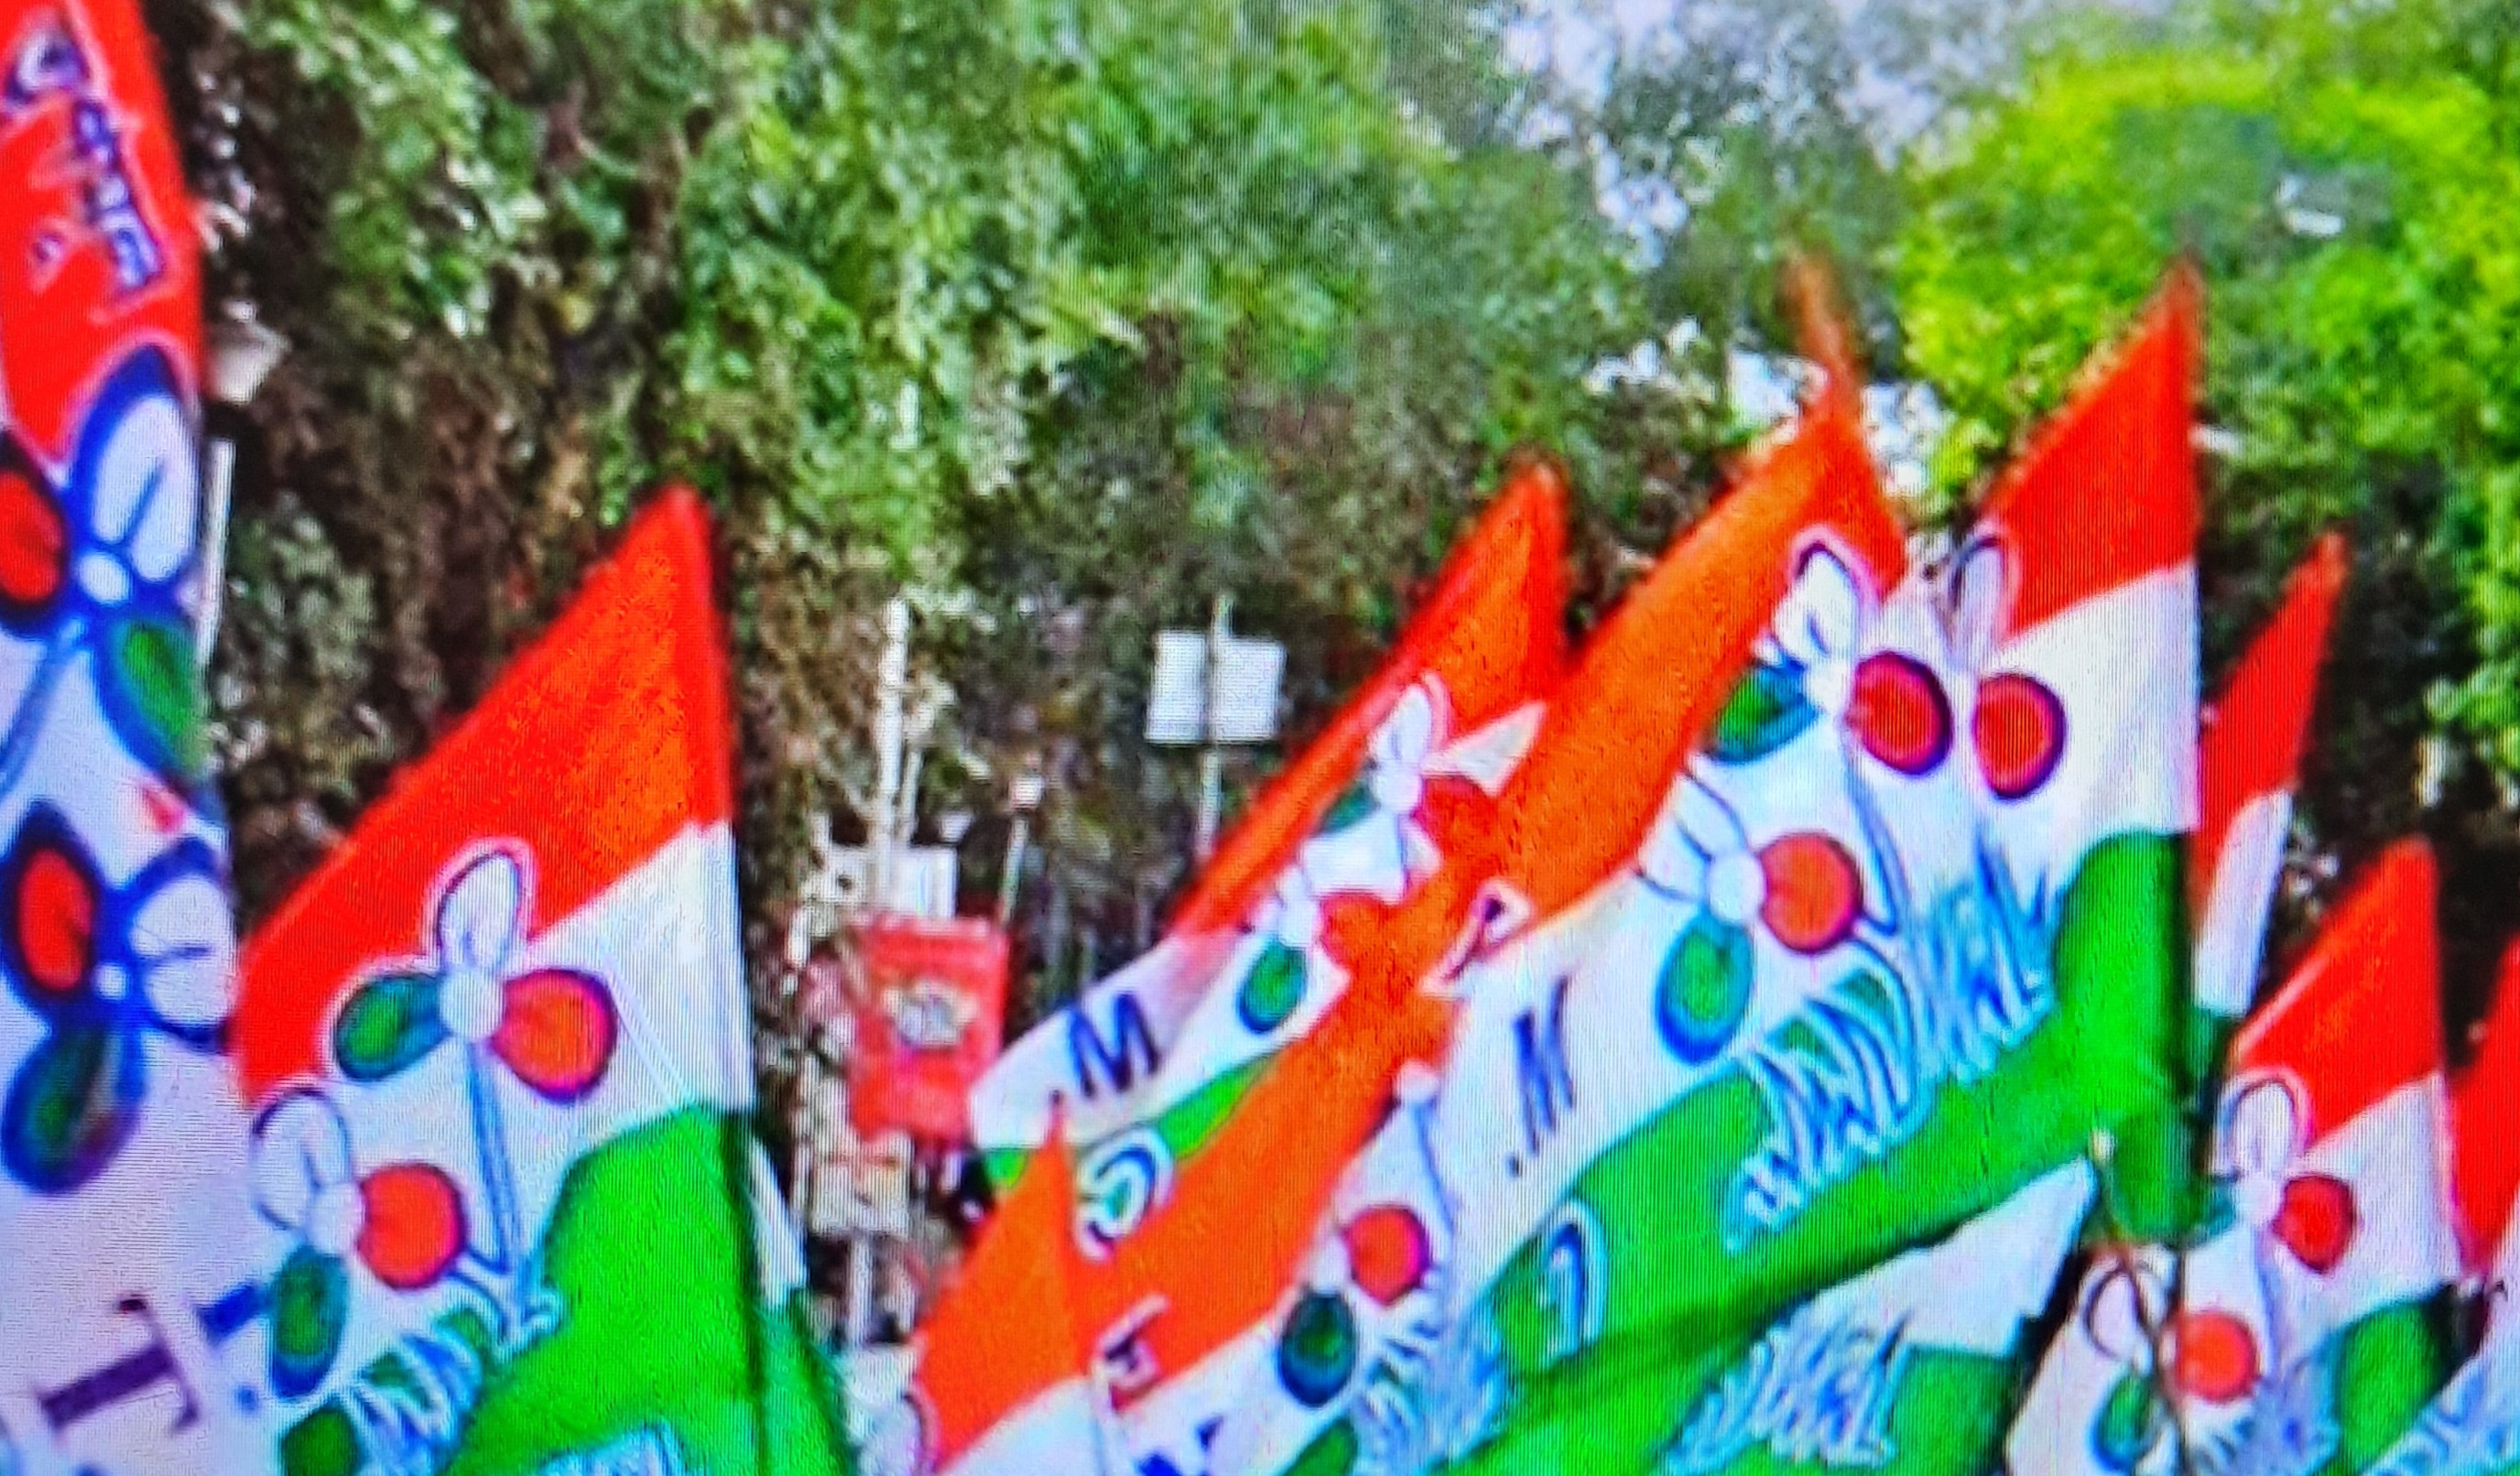 political parties prepare hard to presence in bypoll in west bengal